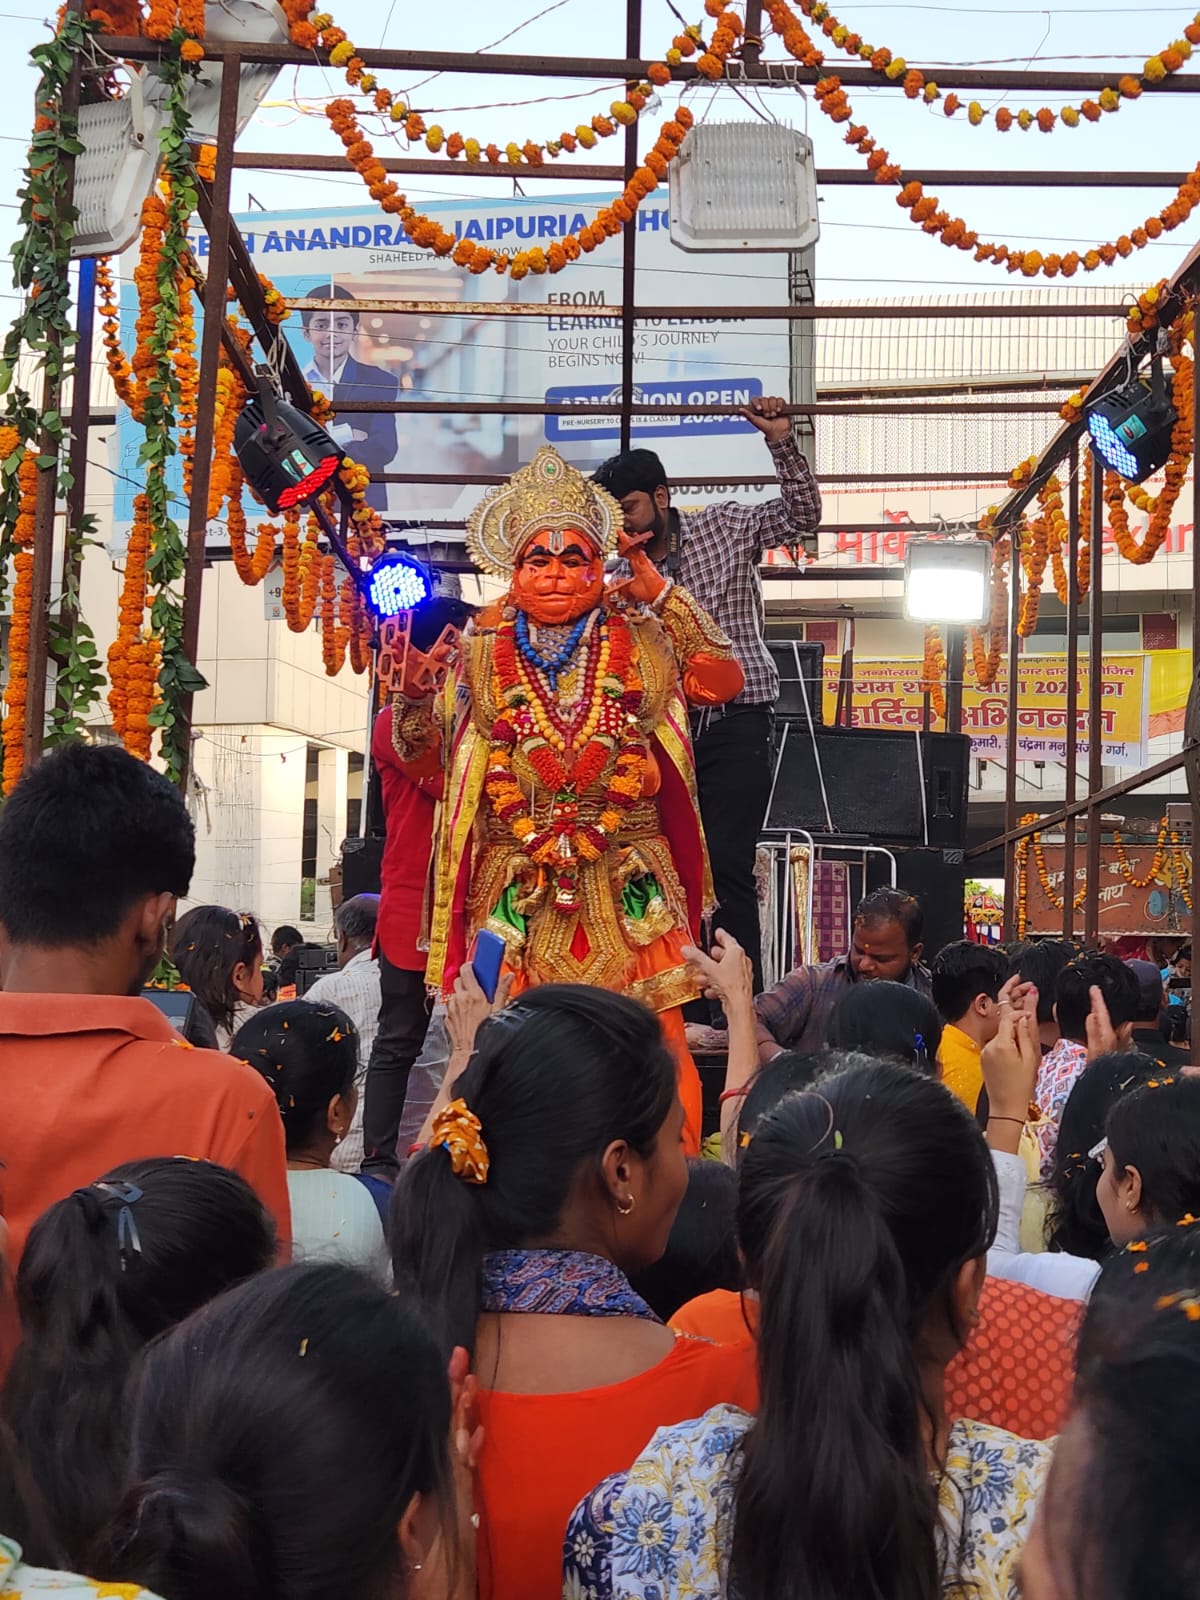 In the procession, live tableaus were performed by boys and girls in the form of various Gods and Goddesses. Elephants, horses, camels also participated in the procession.